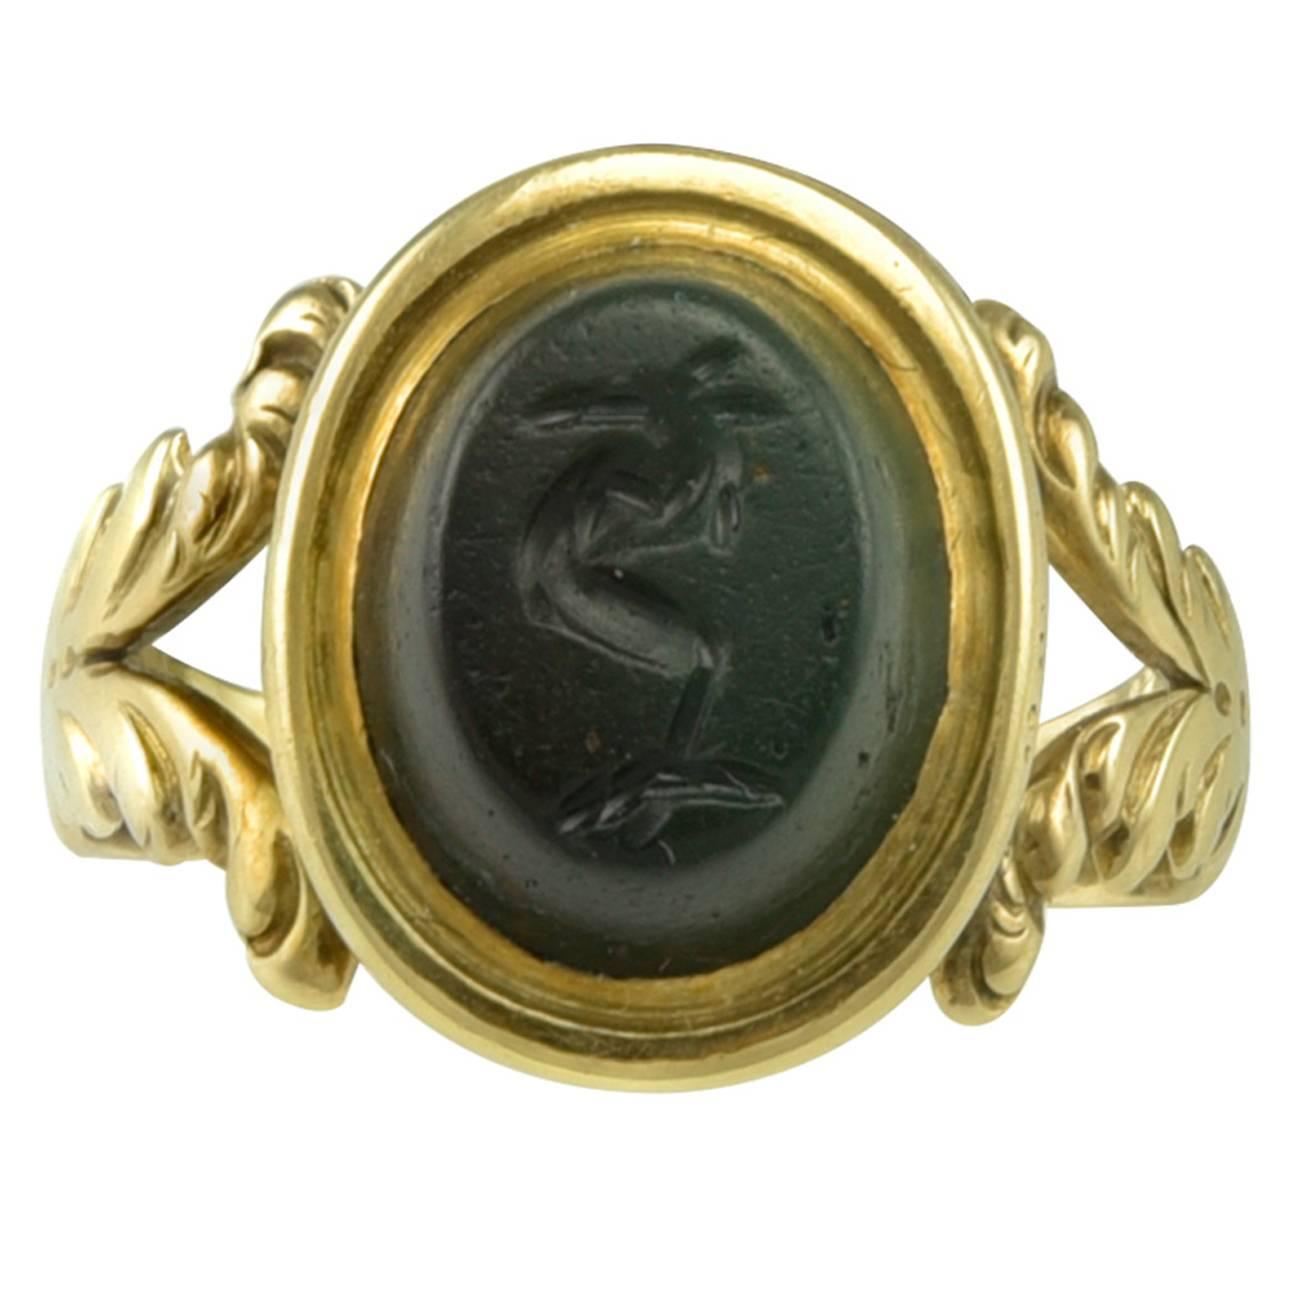 Small 18th century Gold Ring set with a Roman Magical Intaglio